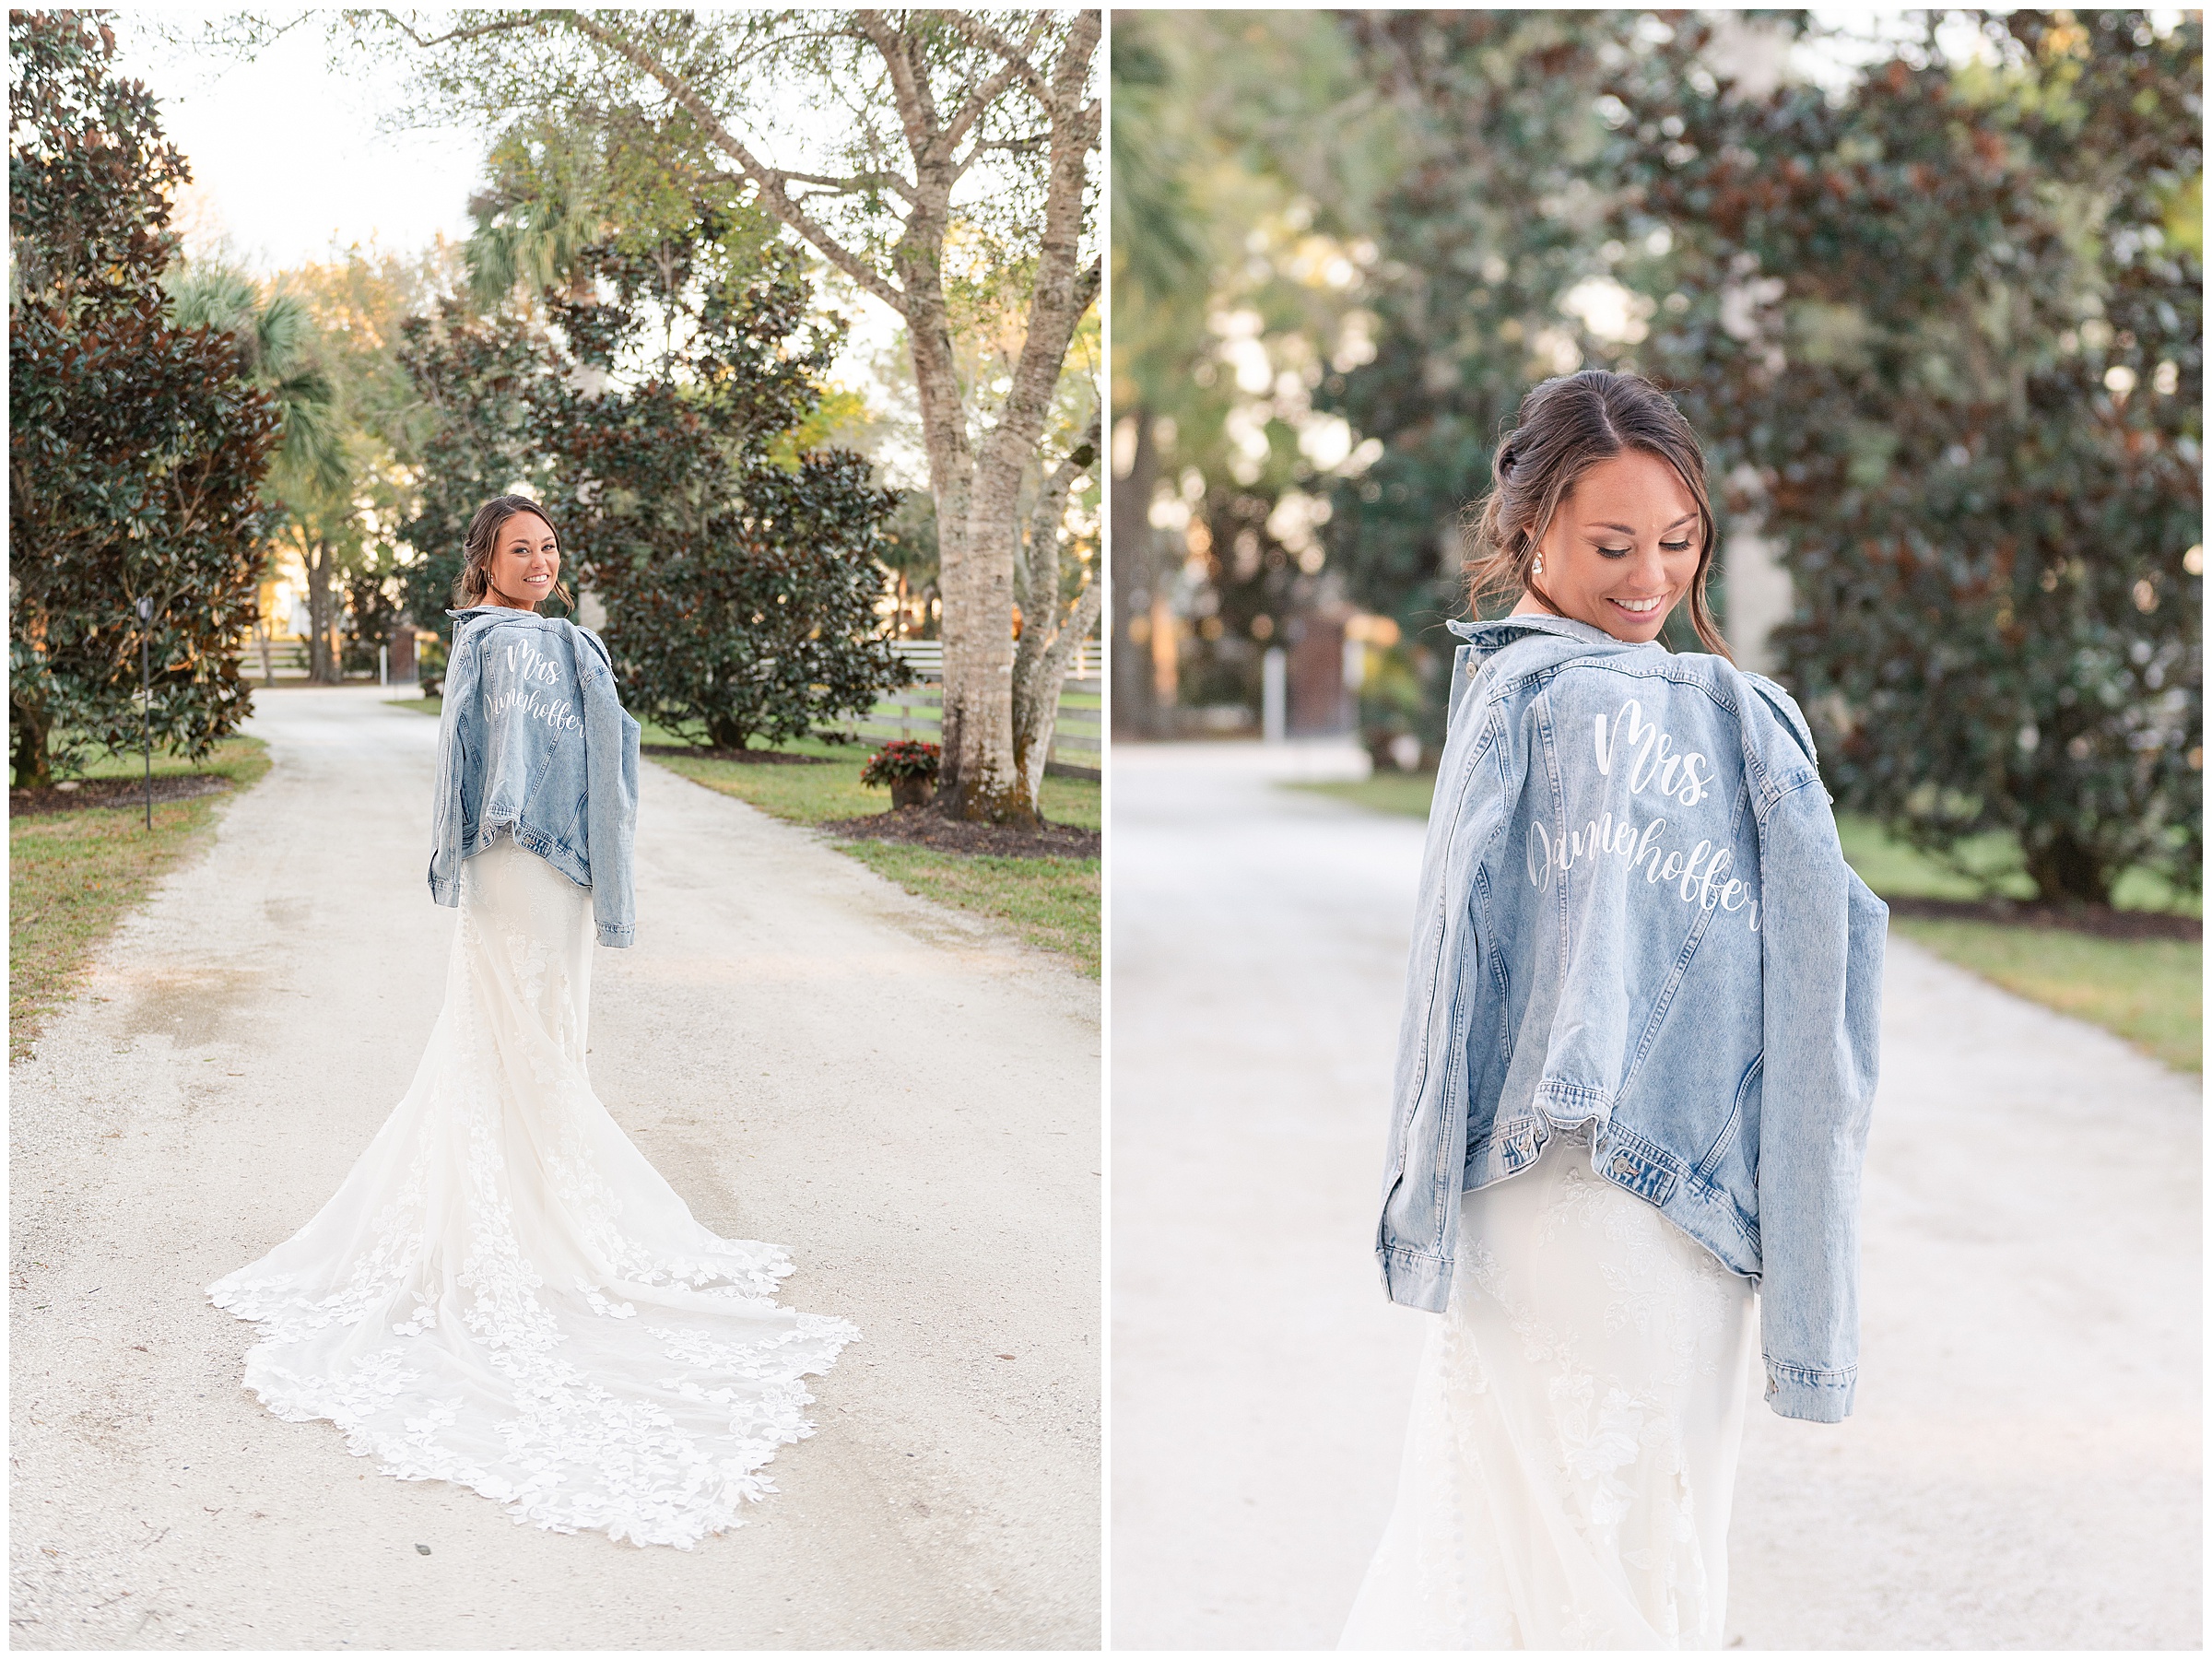 Bride with custom denim jacket with her new last name at a Magnolia Manor Wedding in Vero Beach